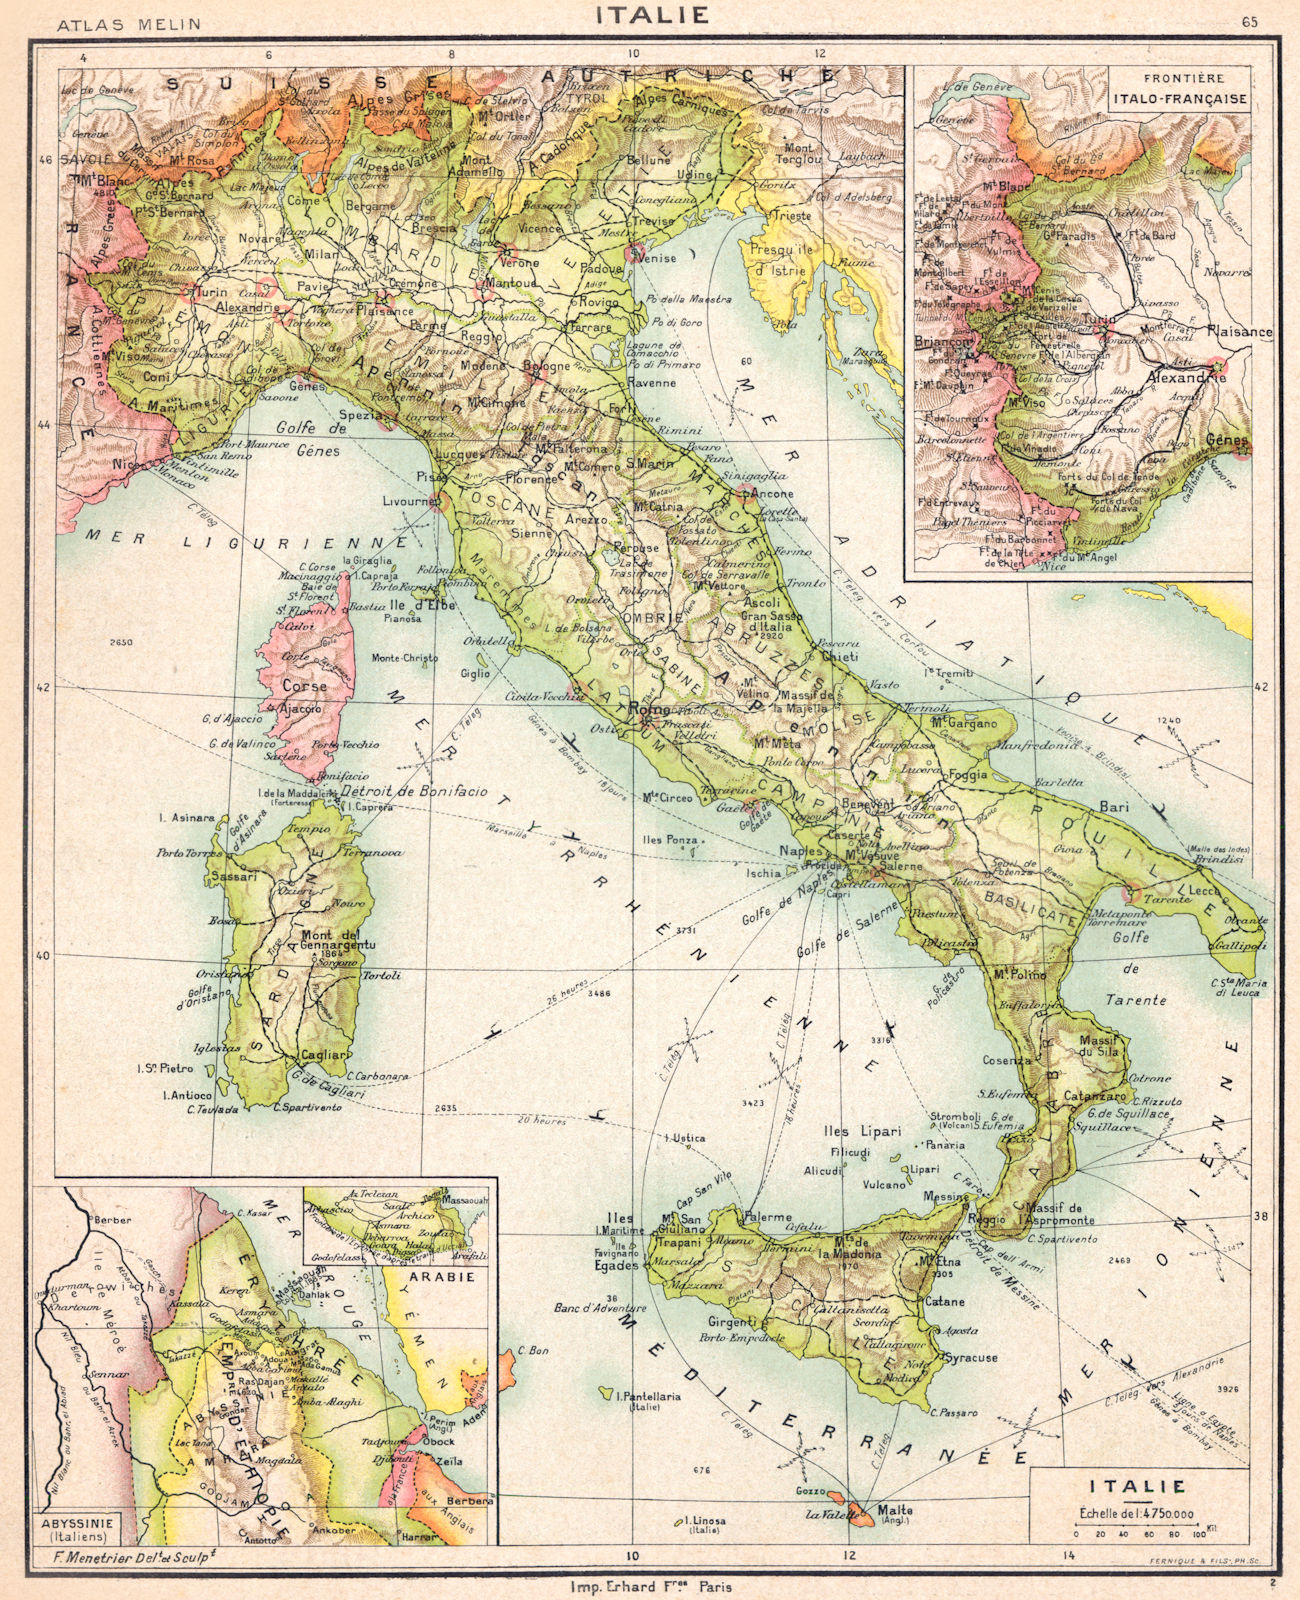 ITALY. Italie; maps Abyssinie (Italiens) ; Frontiére Italo- Française;  1900